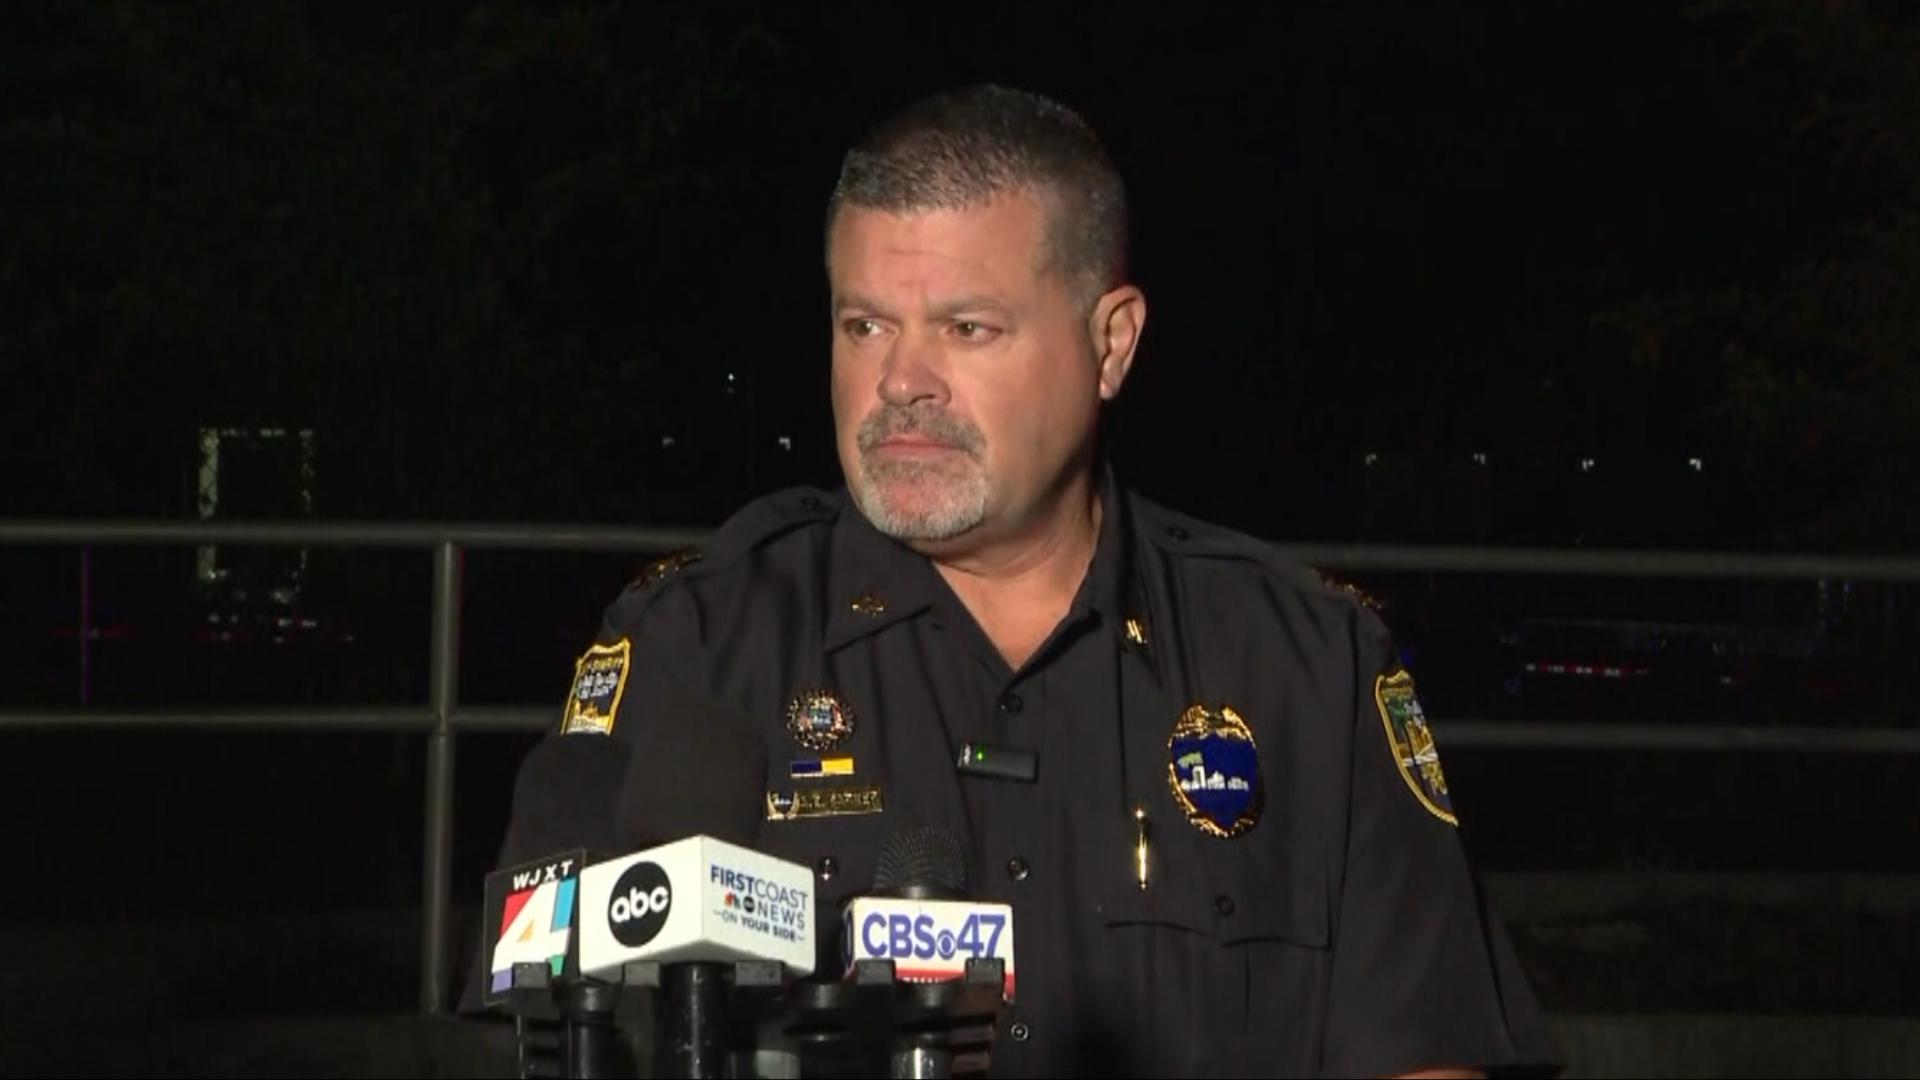 Jacksonville Sheriff's Office Chief Alan Parker says an officer shot the man after a pursuit which spanned "roughly 25 to 20 miles" across the city Tuesday morning.